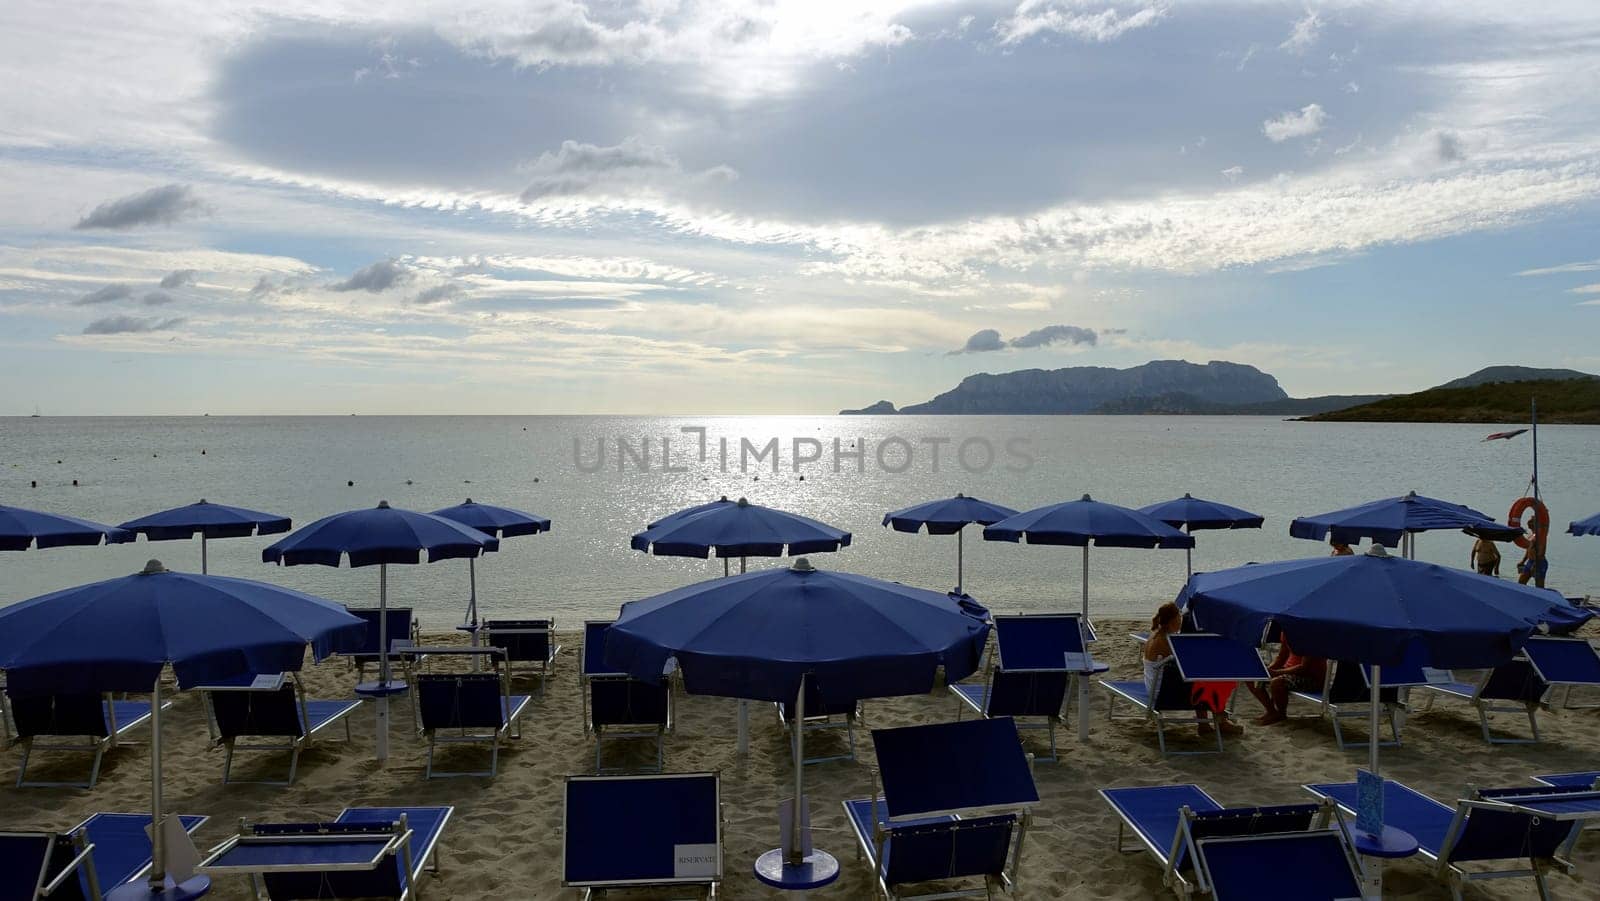 Olbia, Sardinia, Italy. August 8 2021. One of the equipped beaches during a cloudy day. by Jamaladeen